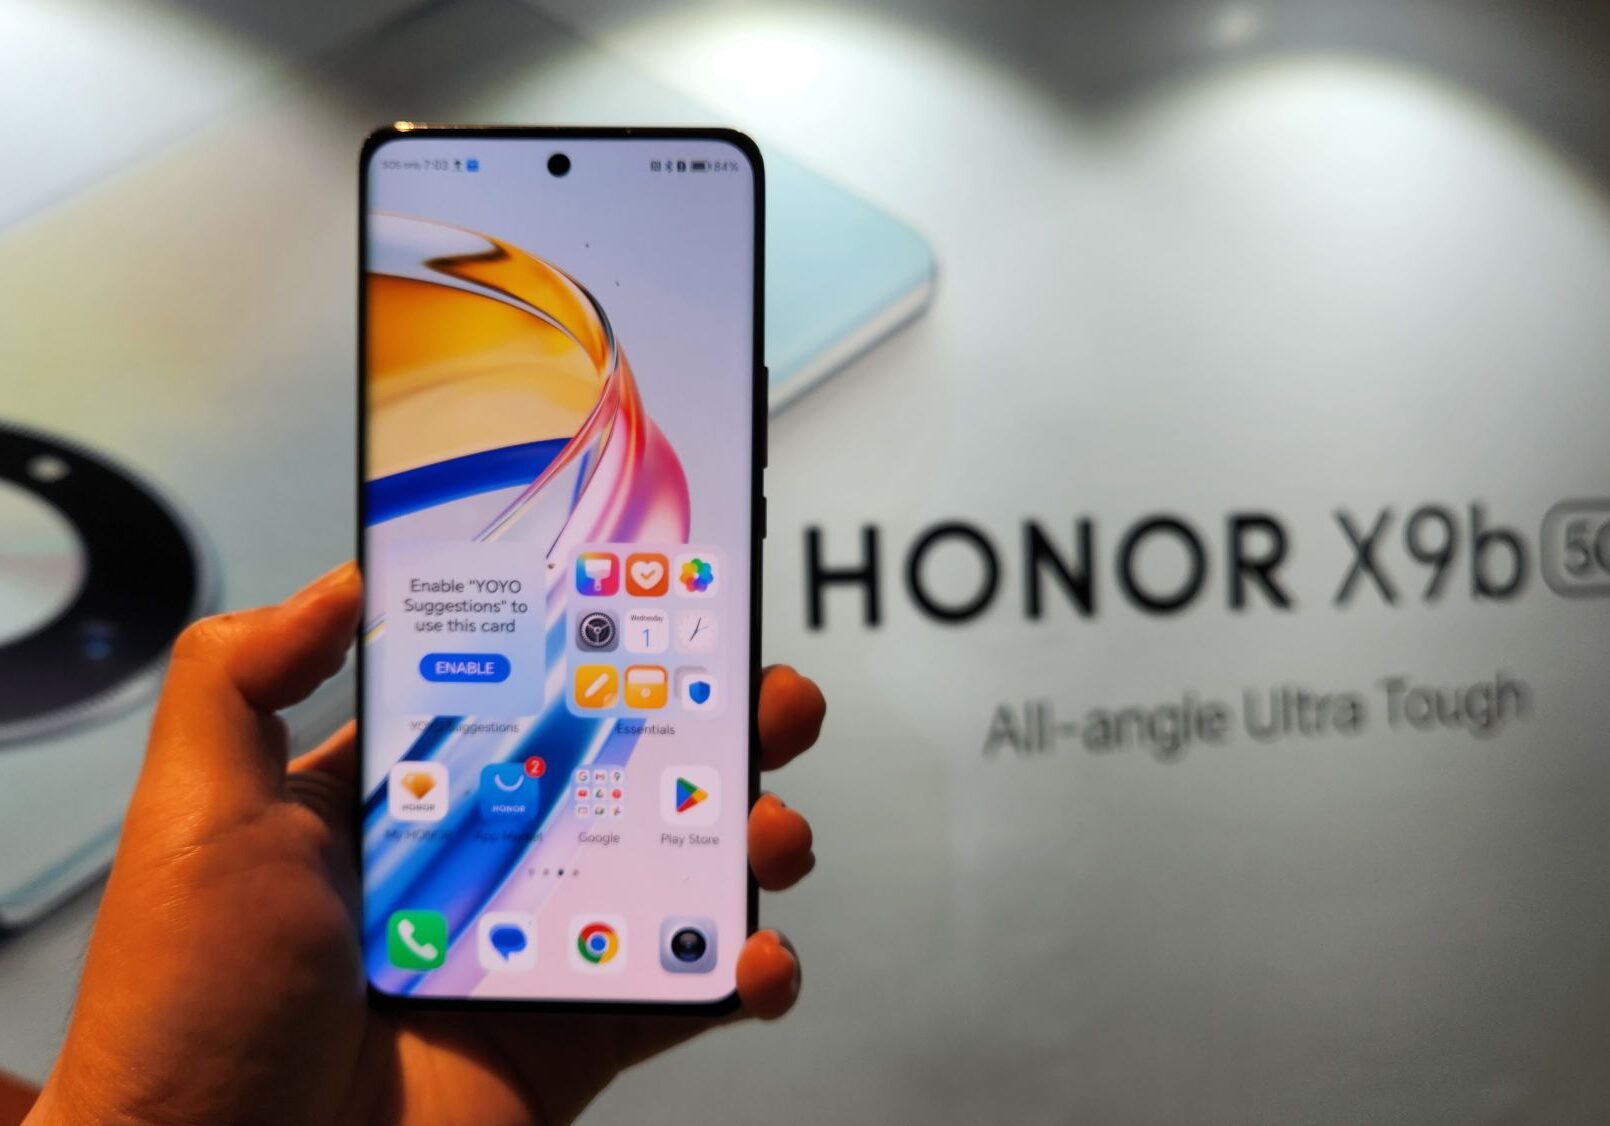 Honor X9b Review cover